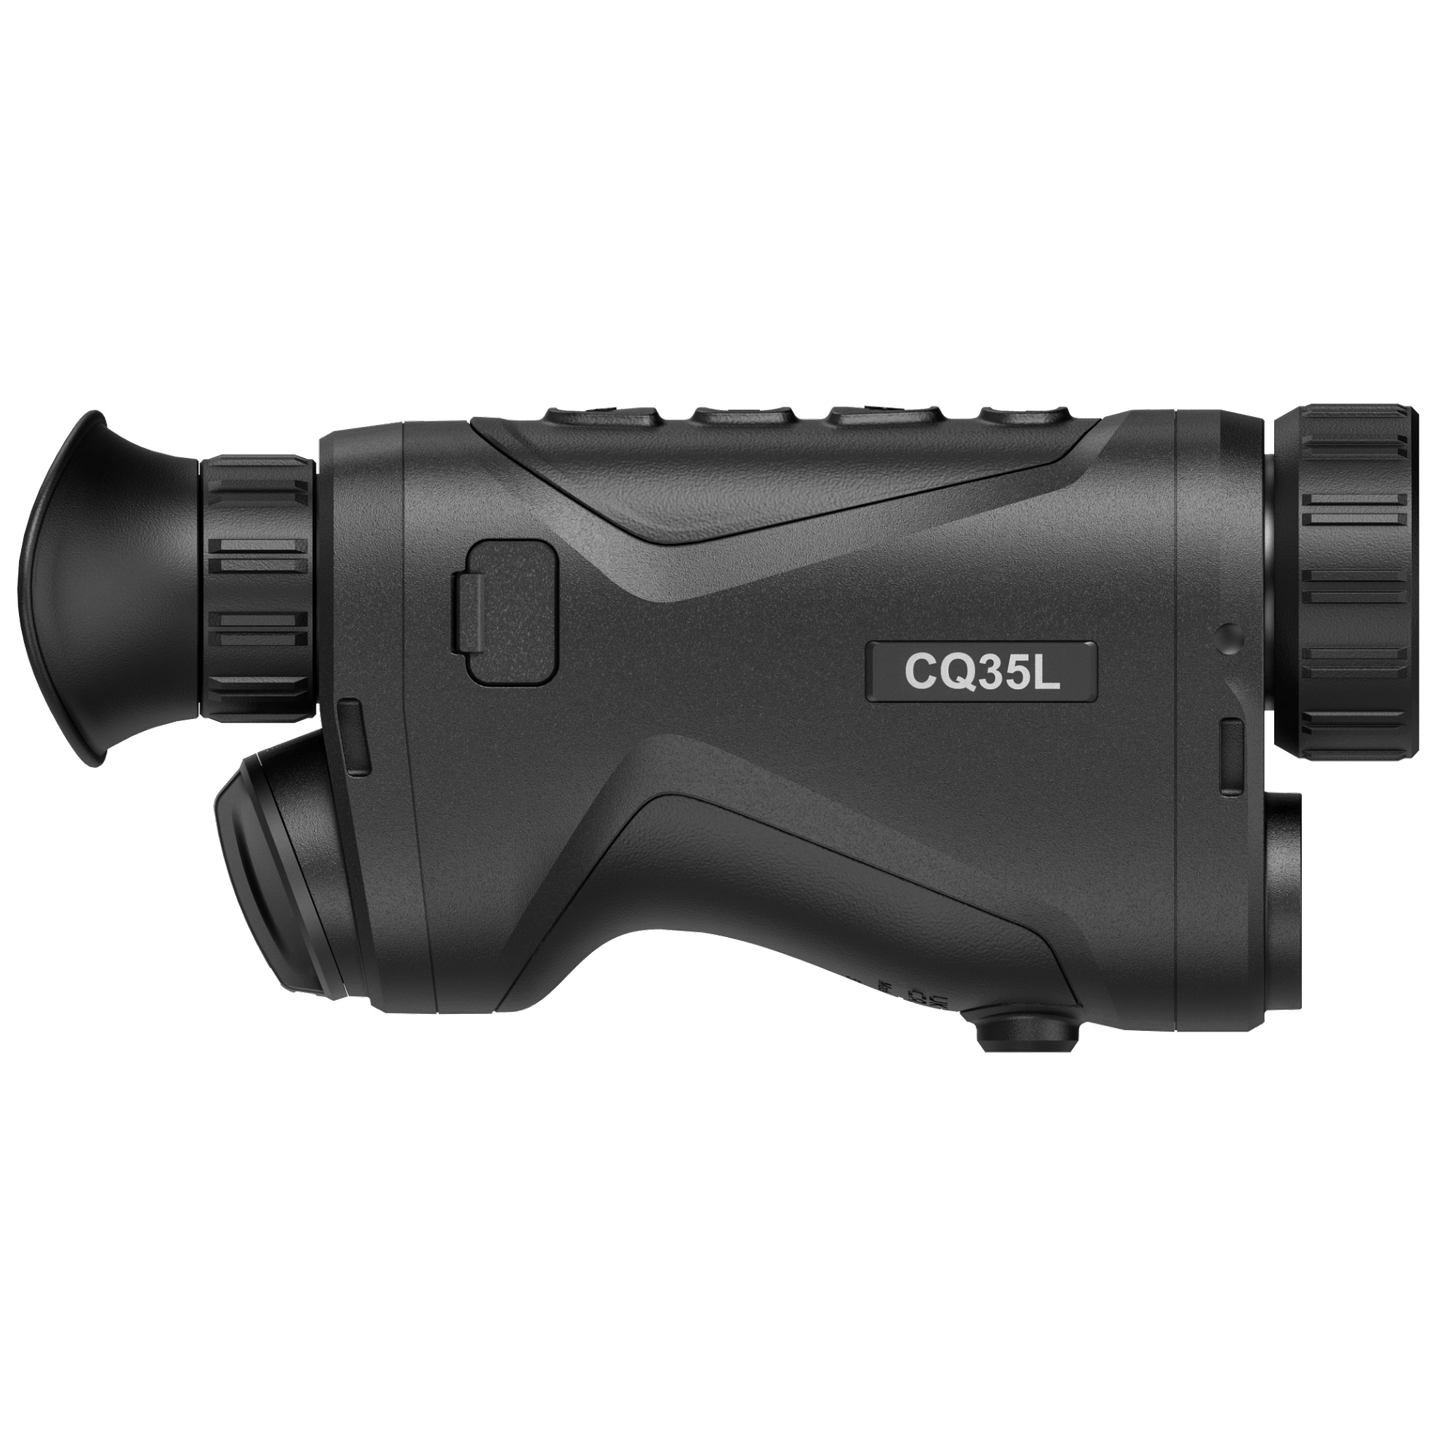 Side view of the HikMicro Condor CQ35L thermal monocular, prominently displaying the model label "CQ35L". This monocular is best suited for hunting and security surveillance, featuring an integrated rangefinder. Its sleek black design and ergonomic grip make it a top choice for those seeking a thermal monocular with rangefinder capabilities.